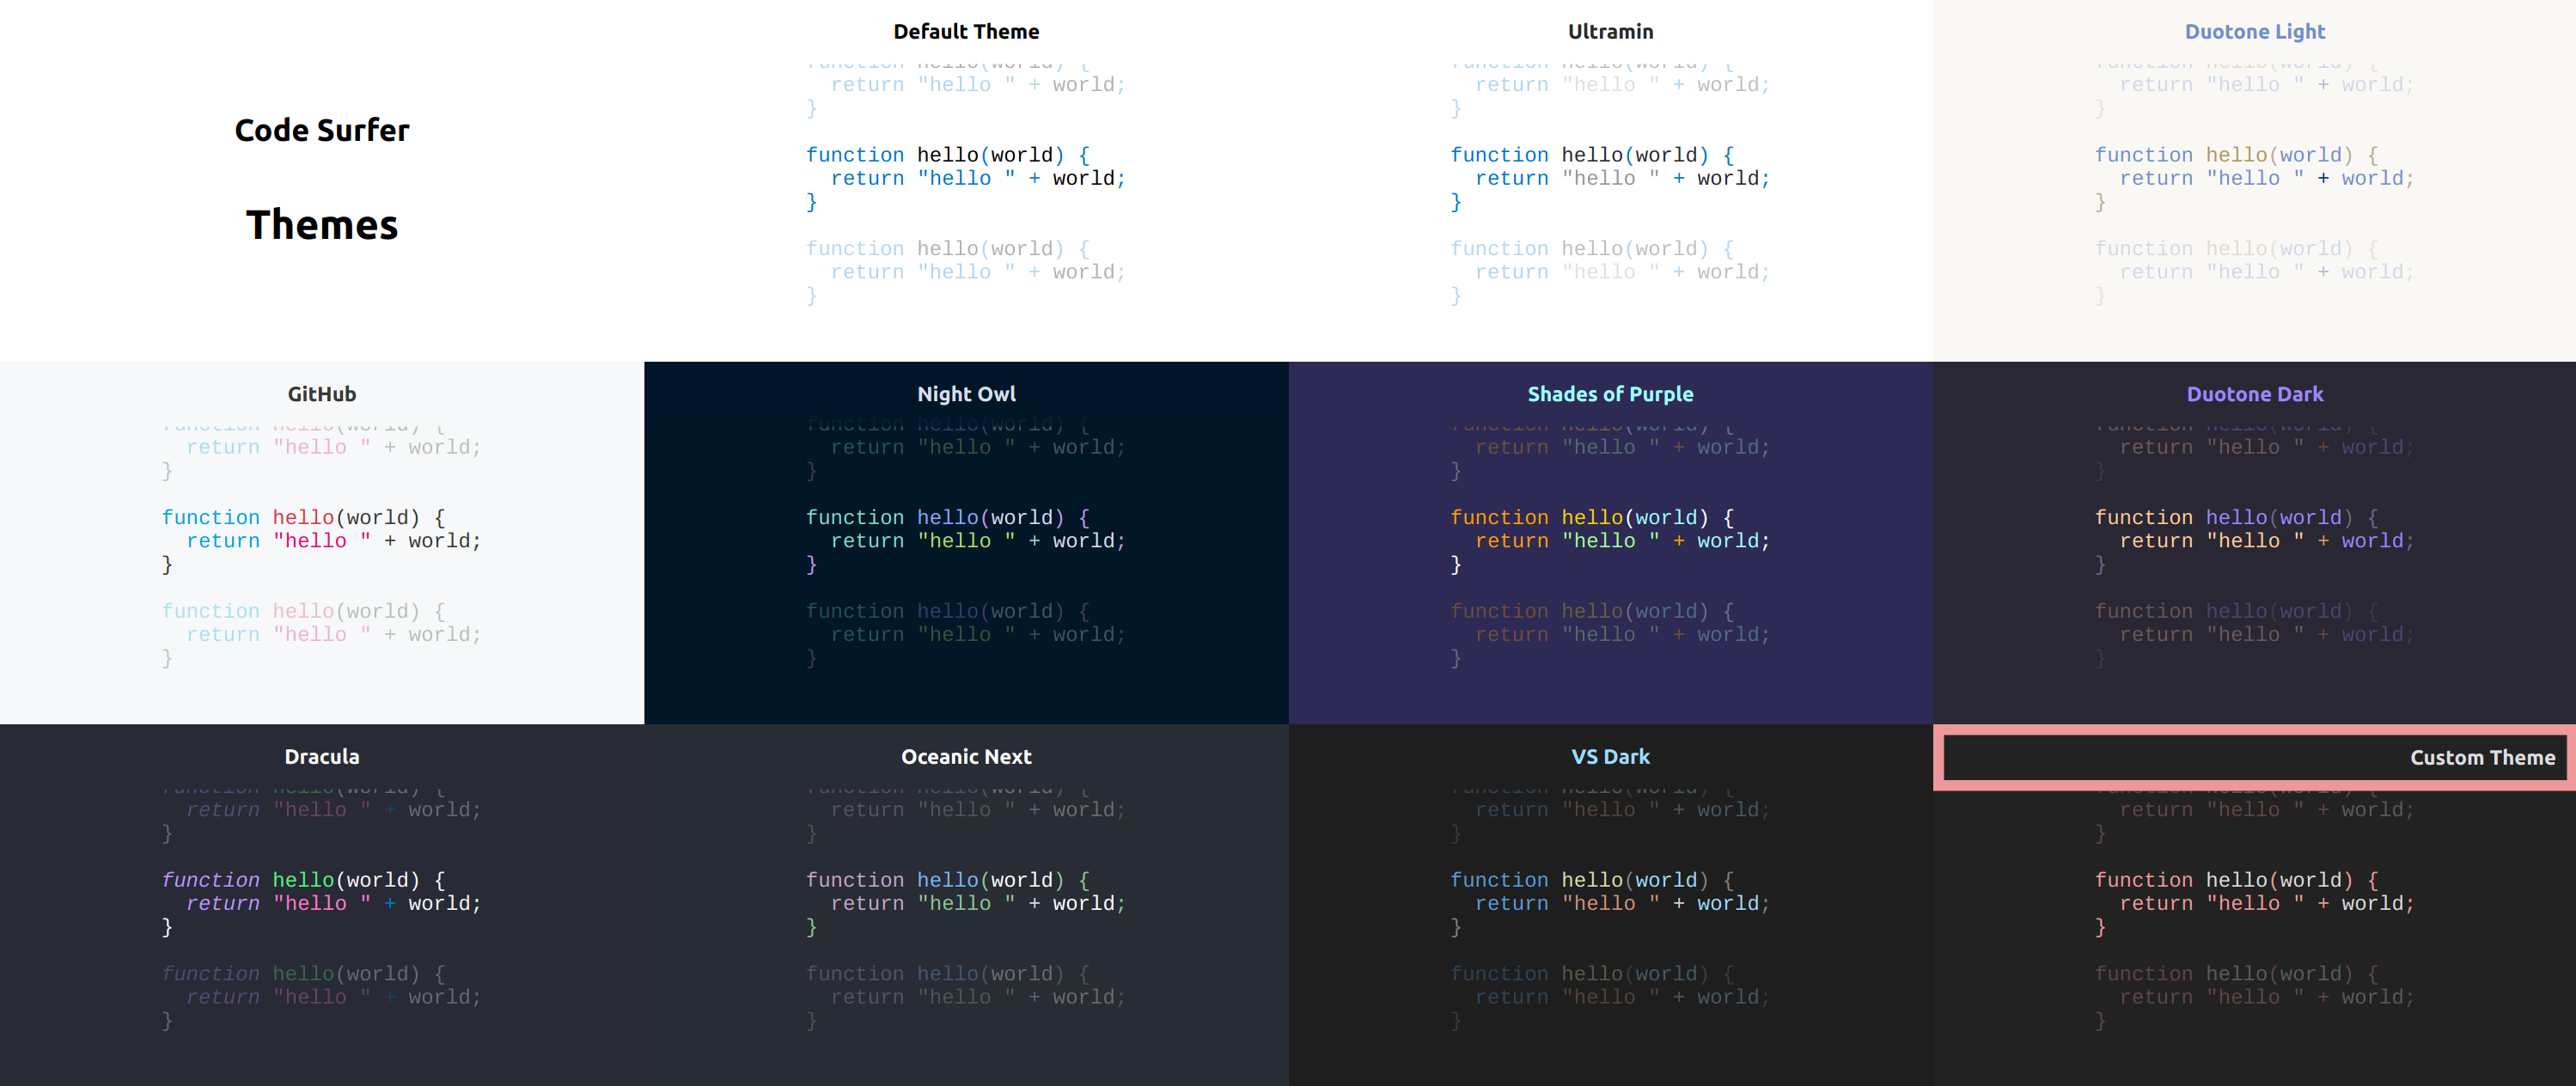 Code Surfer Themes